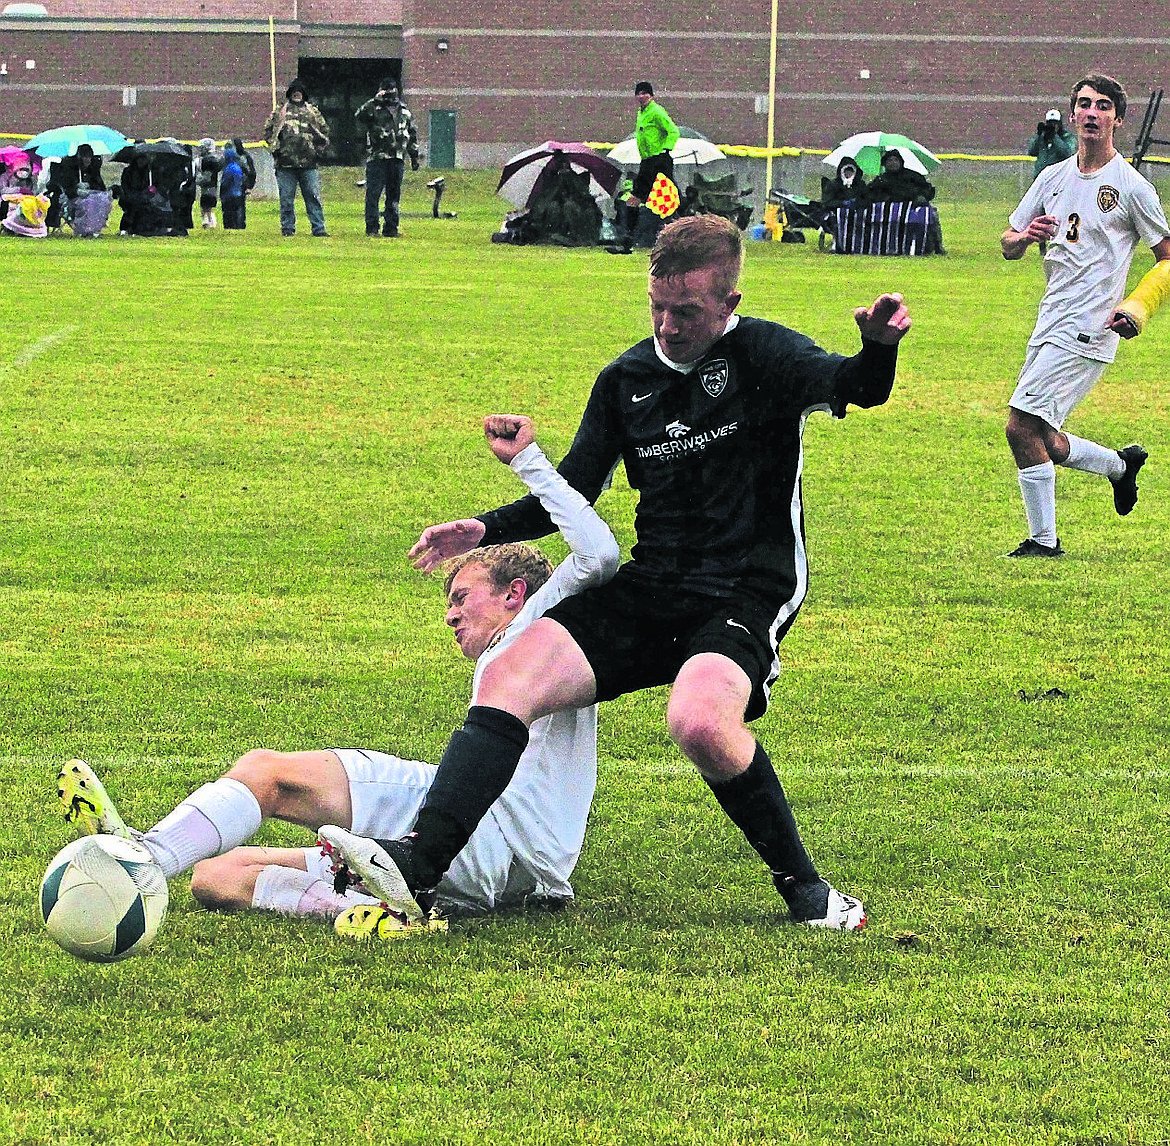 JASON ELLIOTT/Press 
Lake City midfielder Tyler Gasper beats Lewiston's Dalton Laney to the ball during the first half of Wednesday's 5A Region 1 boys soccer championship at the Irma Anderl Soccer Complex.